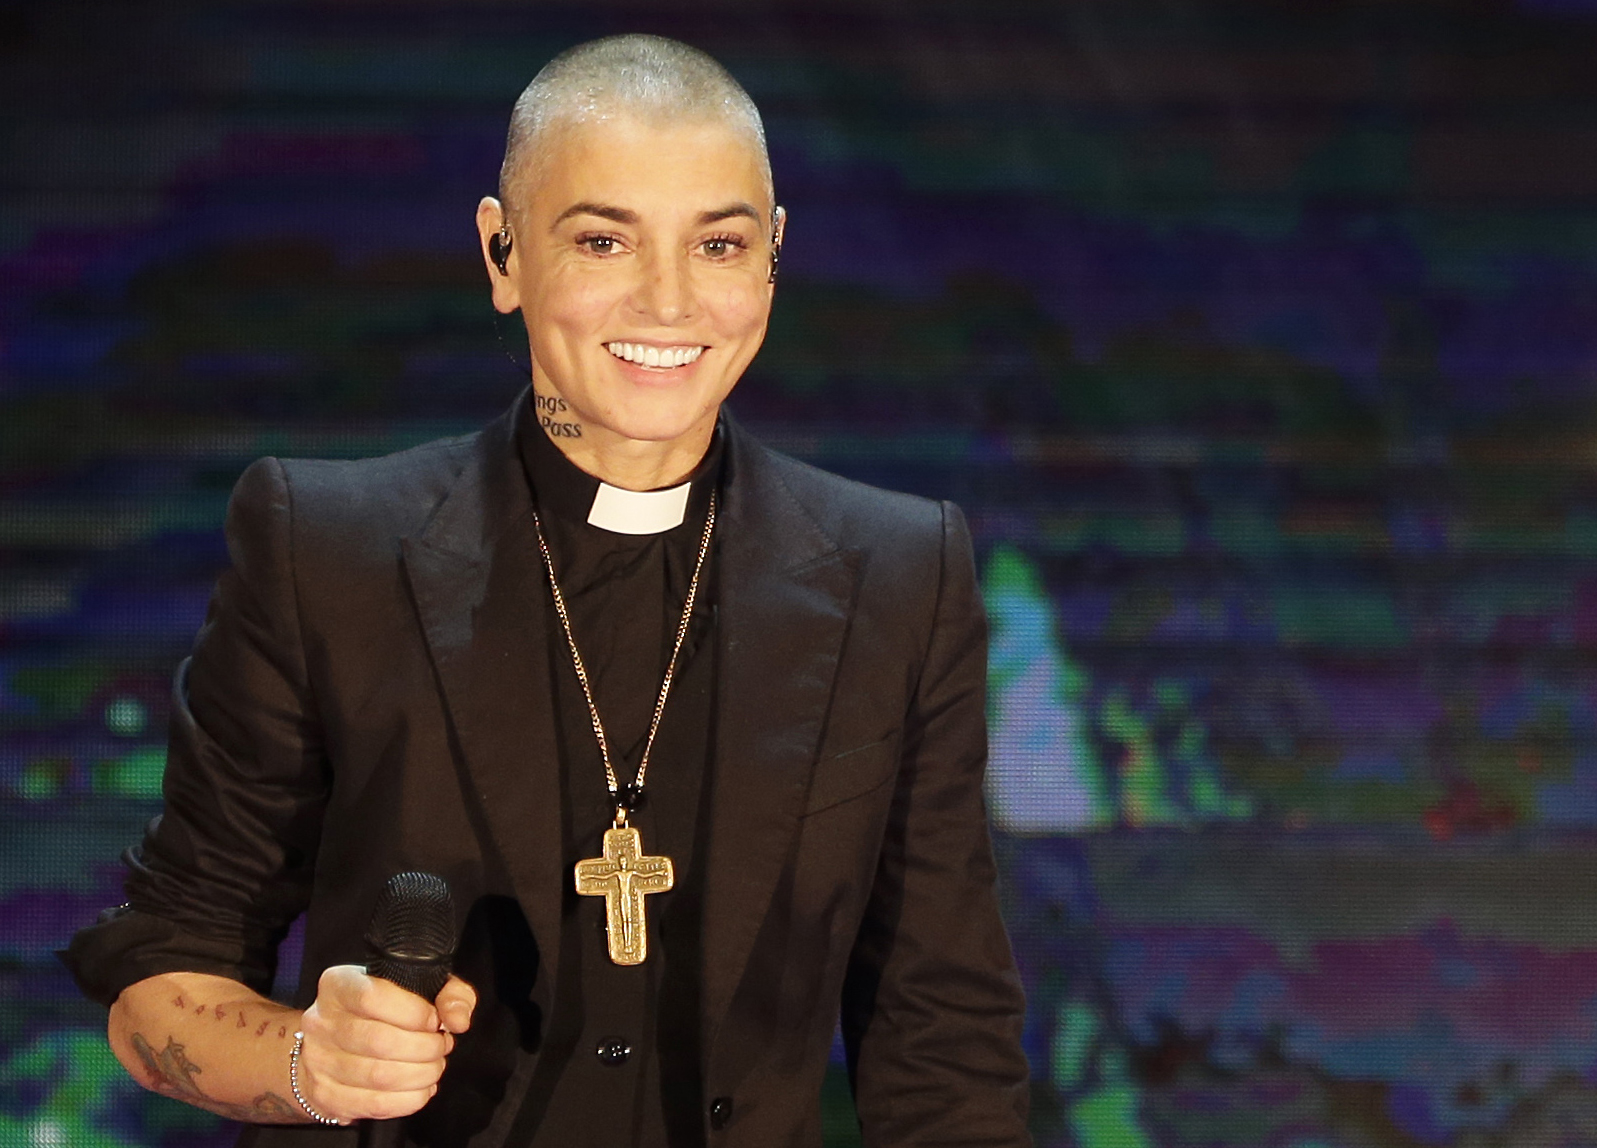 FILE - This is Oct. 5, 2014, file photo of Irish singer Sinead O'Connor performs during the Italian State RAI TV program "Che Tempo che Fa", in Milan, Italy. Police documents show a search last month in suburban Chicago for Sinead O'Connor was launched after a doctor concerned about her welfare contacted police. The Associated Press obtained documents Wednesday, June 1, 2016, from Wilmette police through a Freedom of Information Act request. (AP Photo/Antonio Calanni, File)